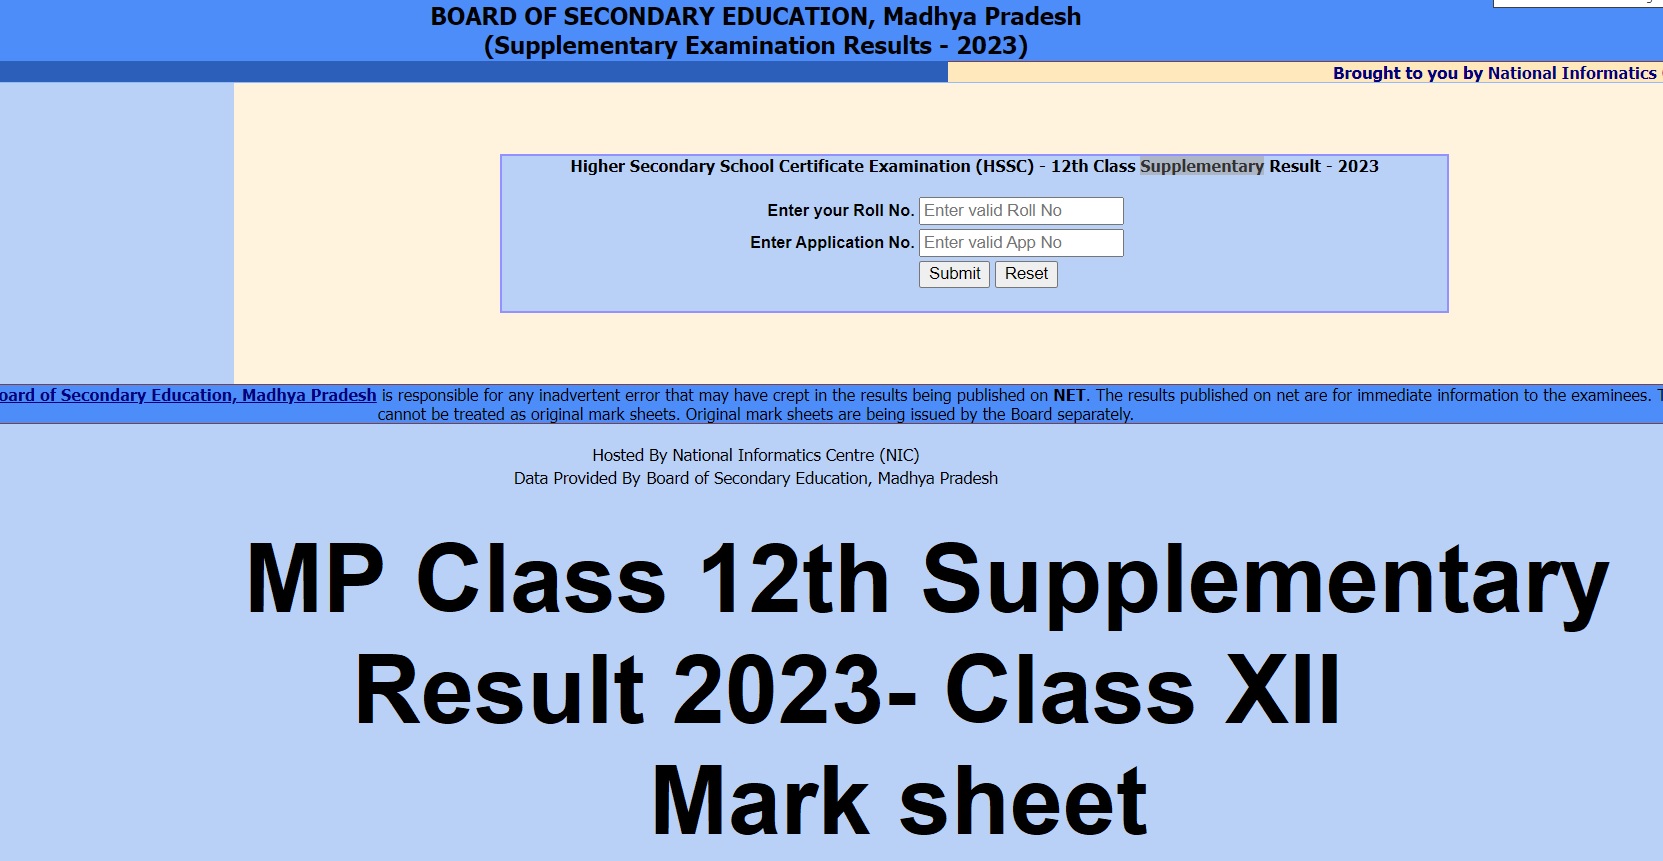 MP Class 12th Supplementary Result 2023